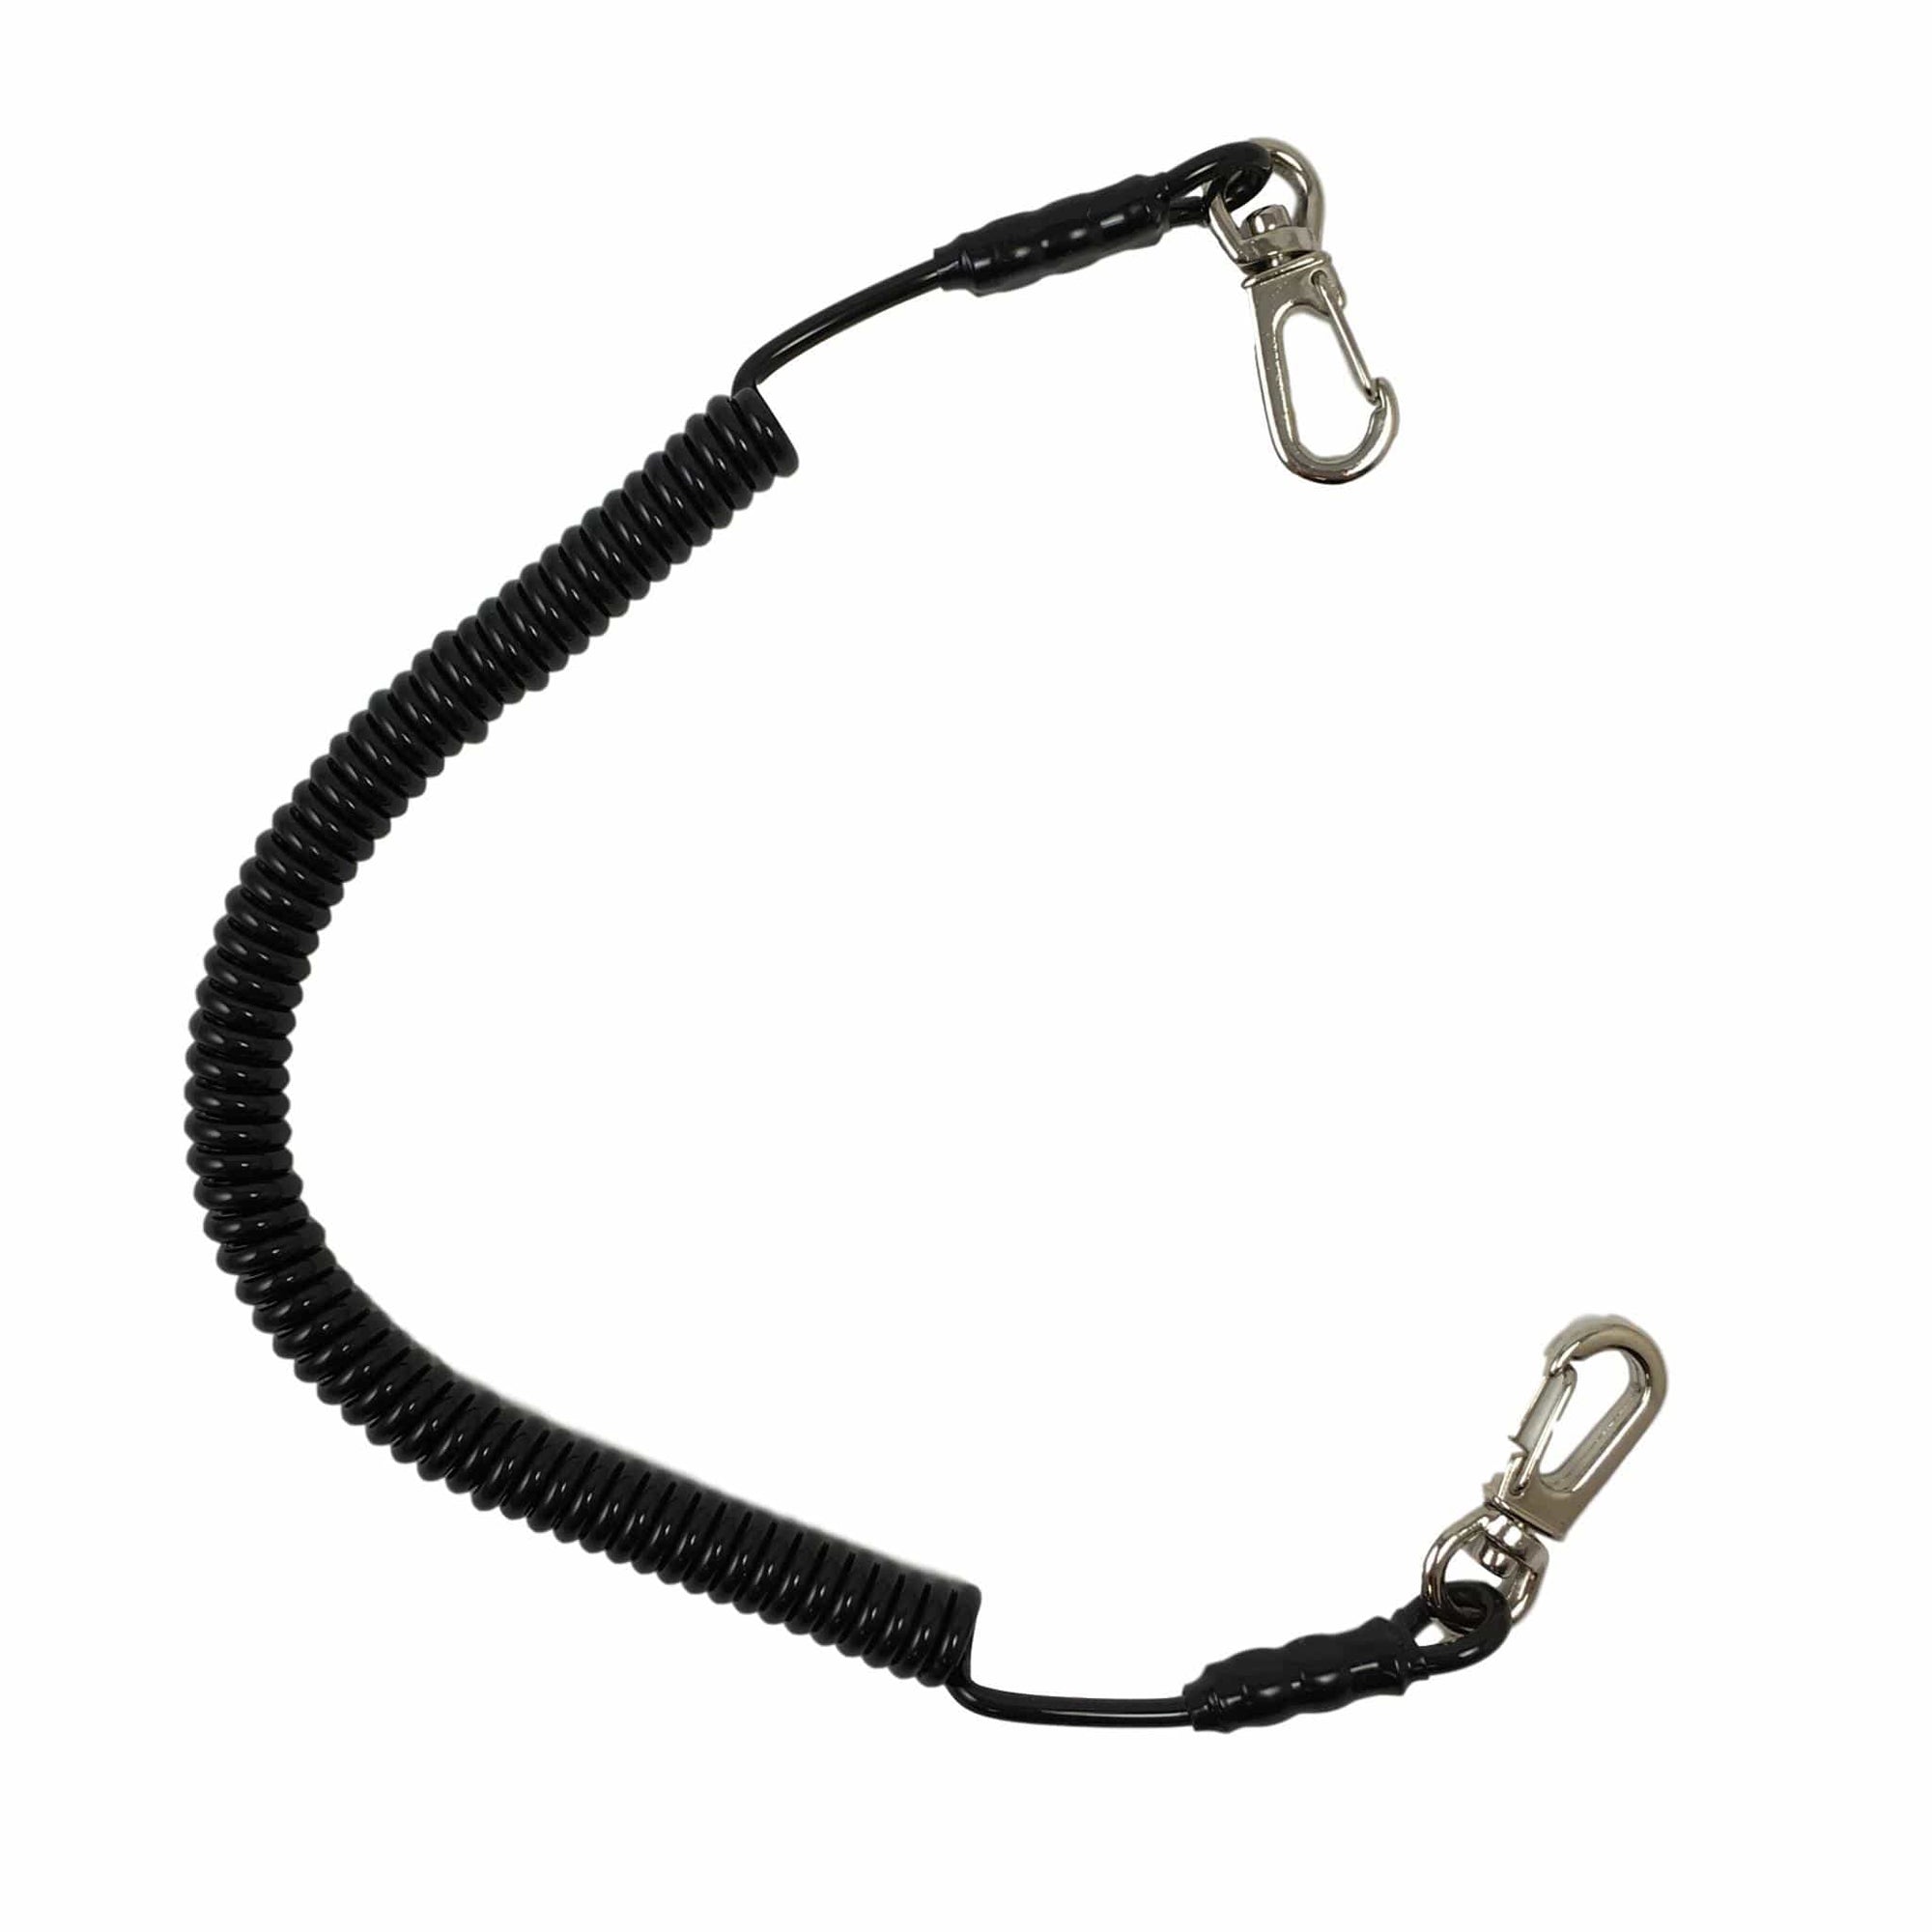 Lanyards and Clips - The Saltwater Edge